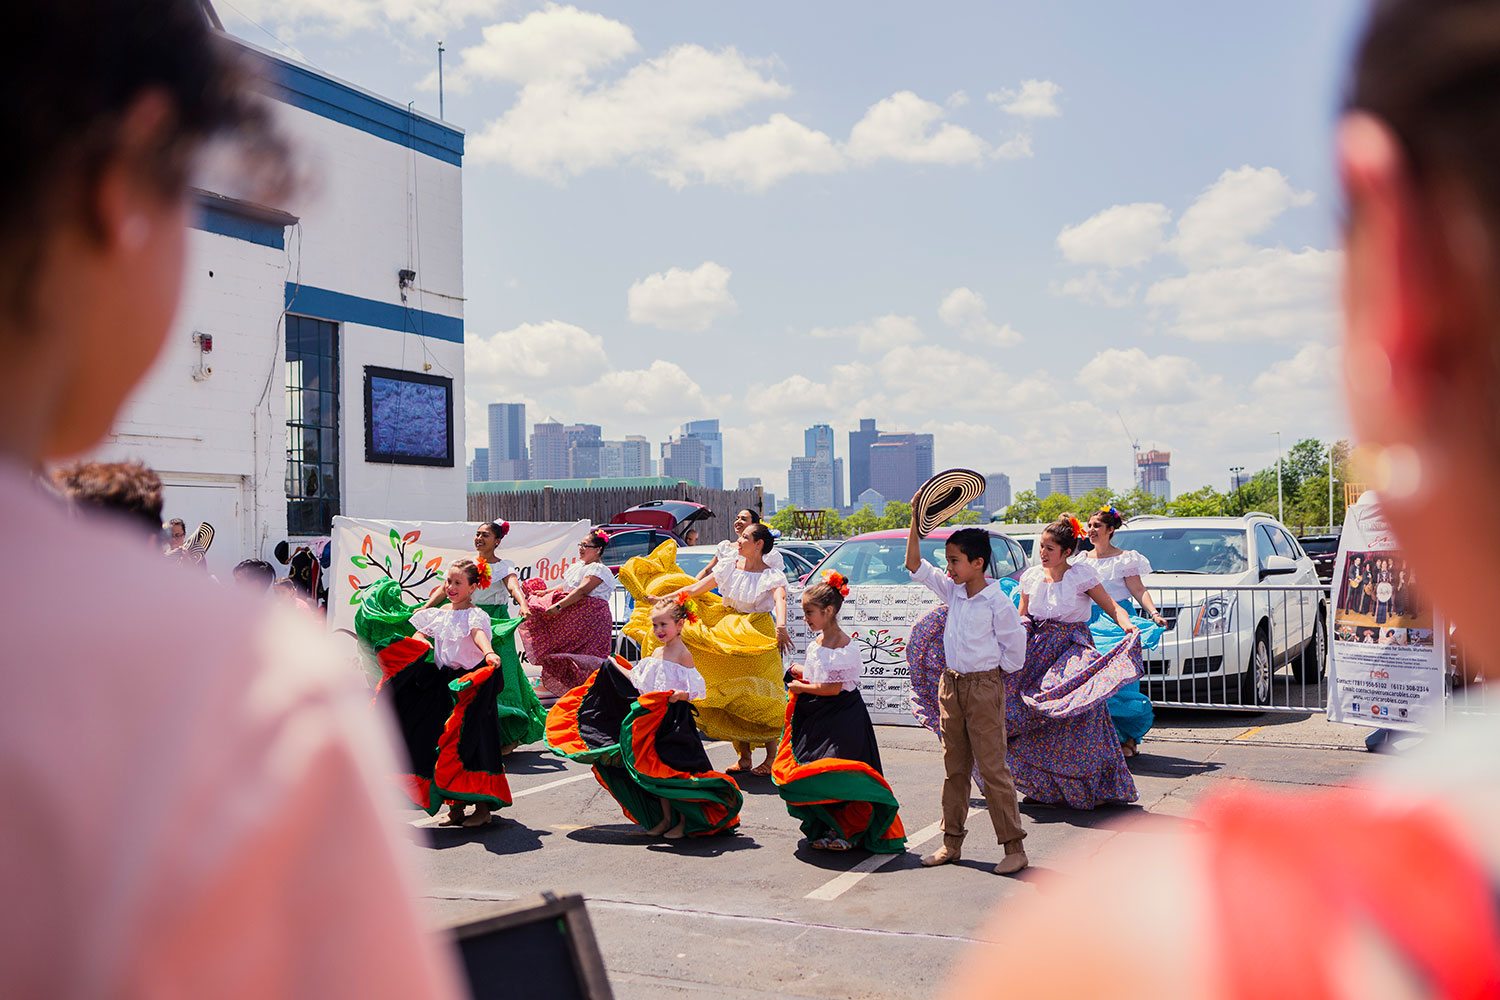 Children in traditional folklorico outfits dancing in a parking lot